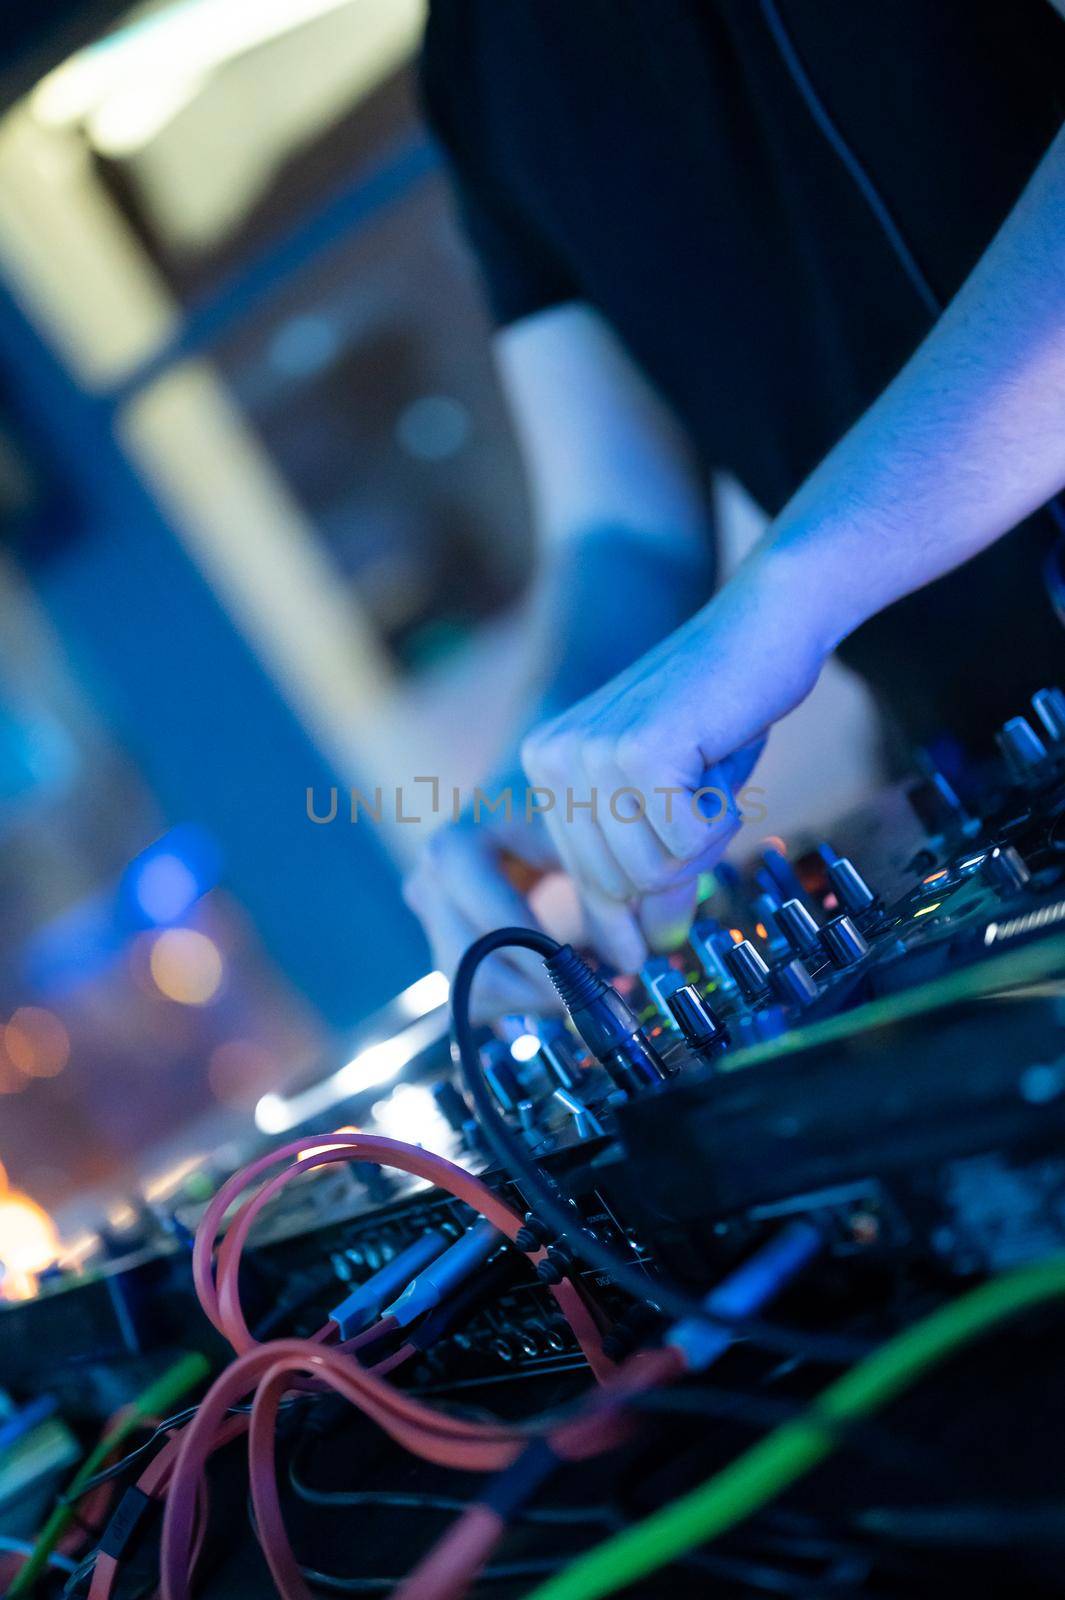 Deejay mixing at party. High quality photography.